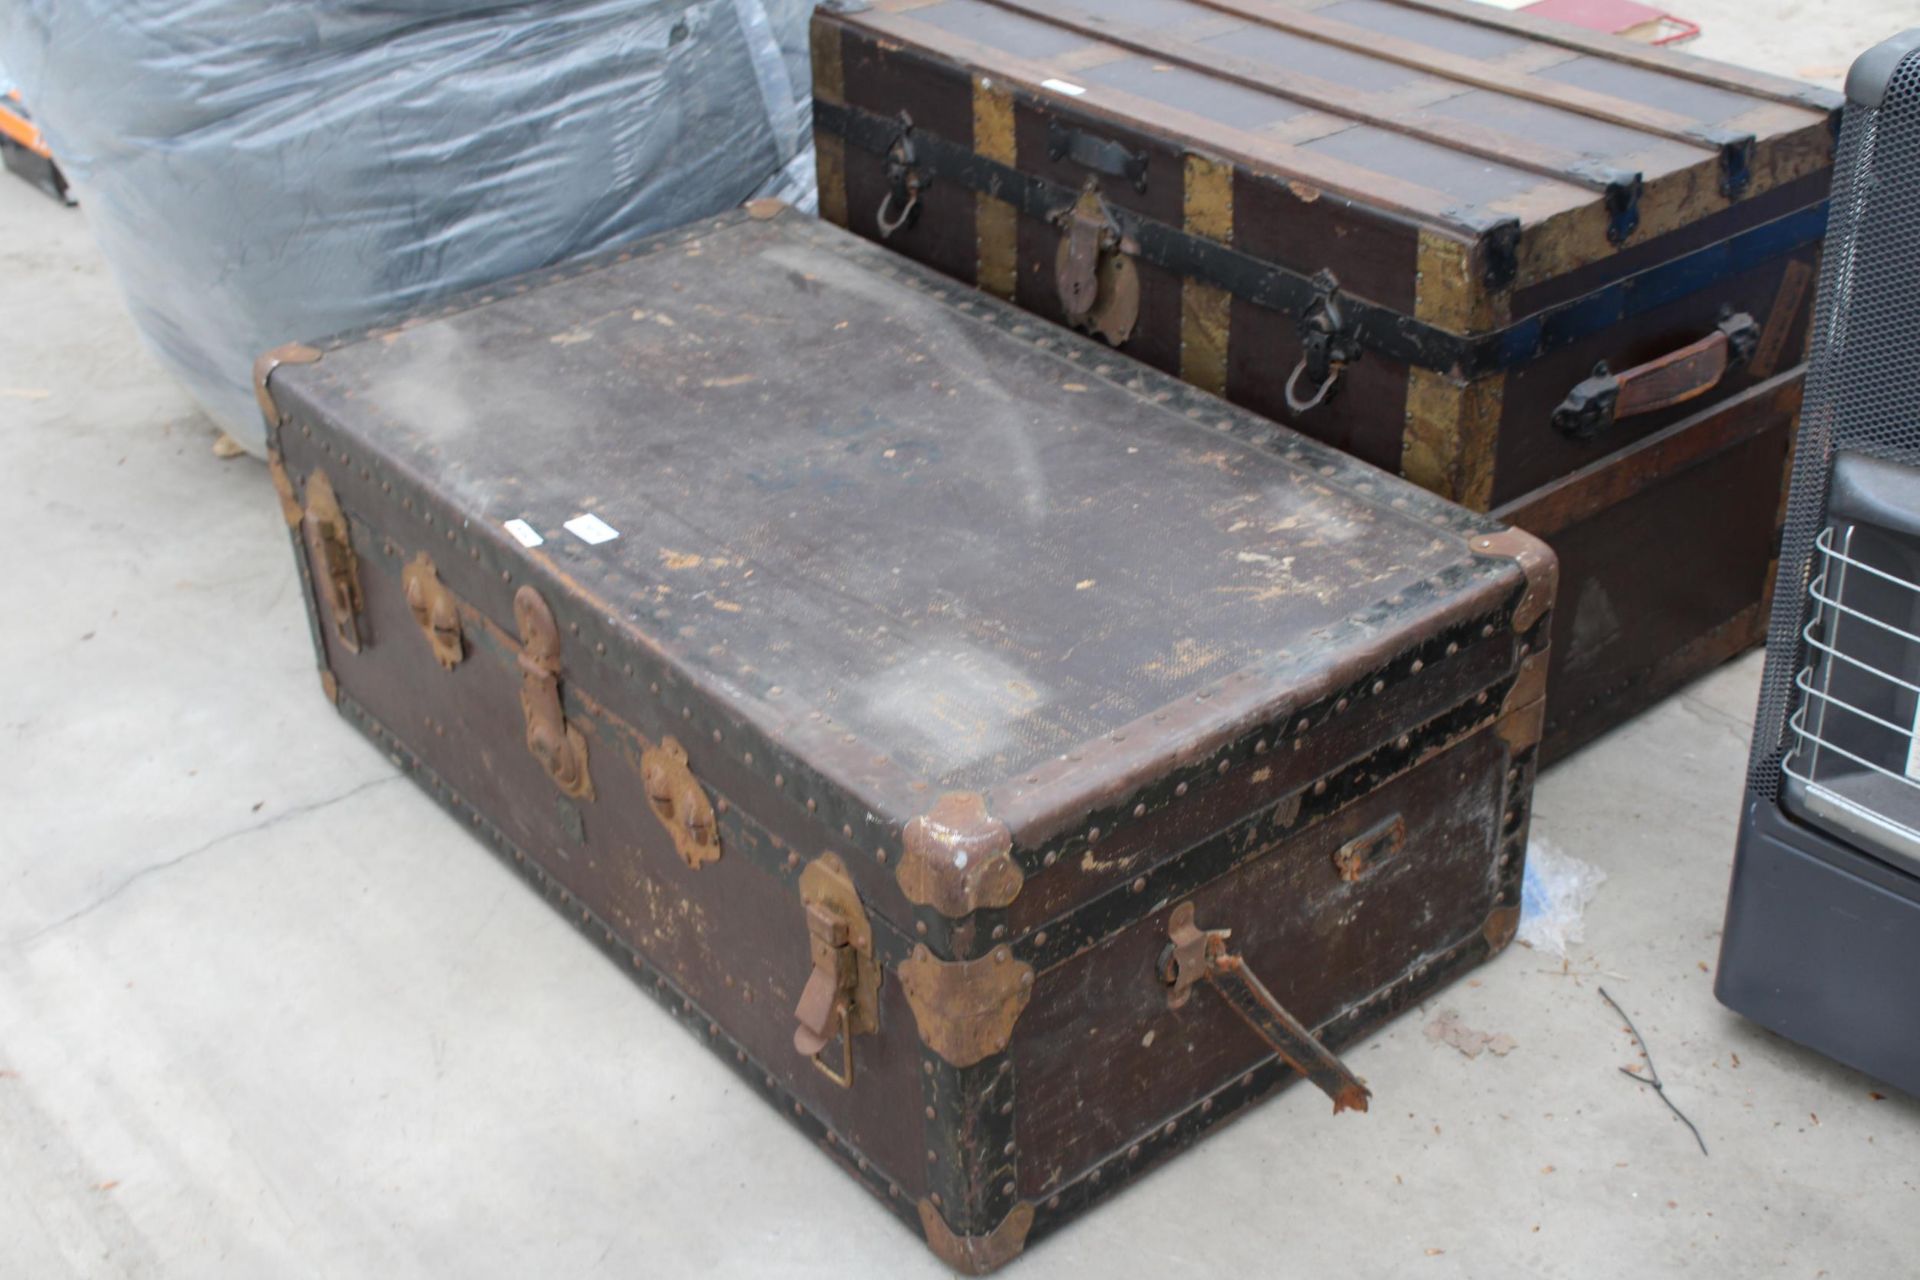 TWO VINTAGE TRAVEL TRUNKS - Image 2 of 4